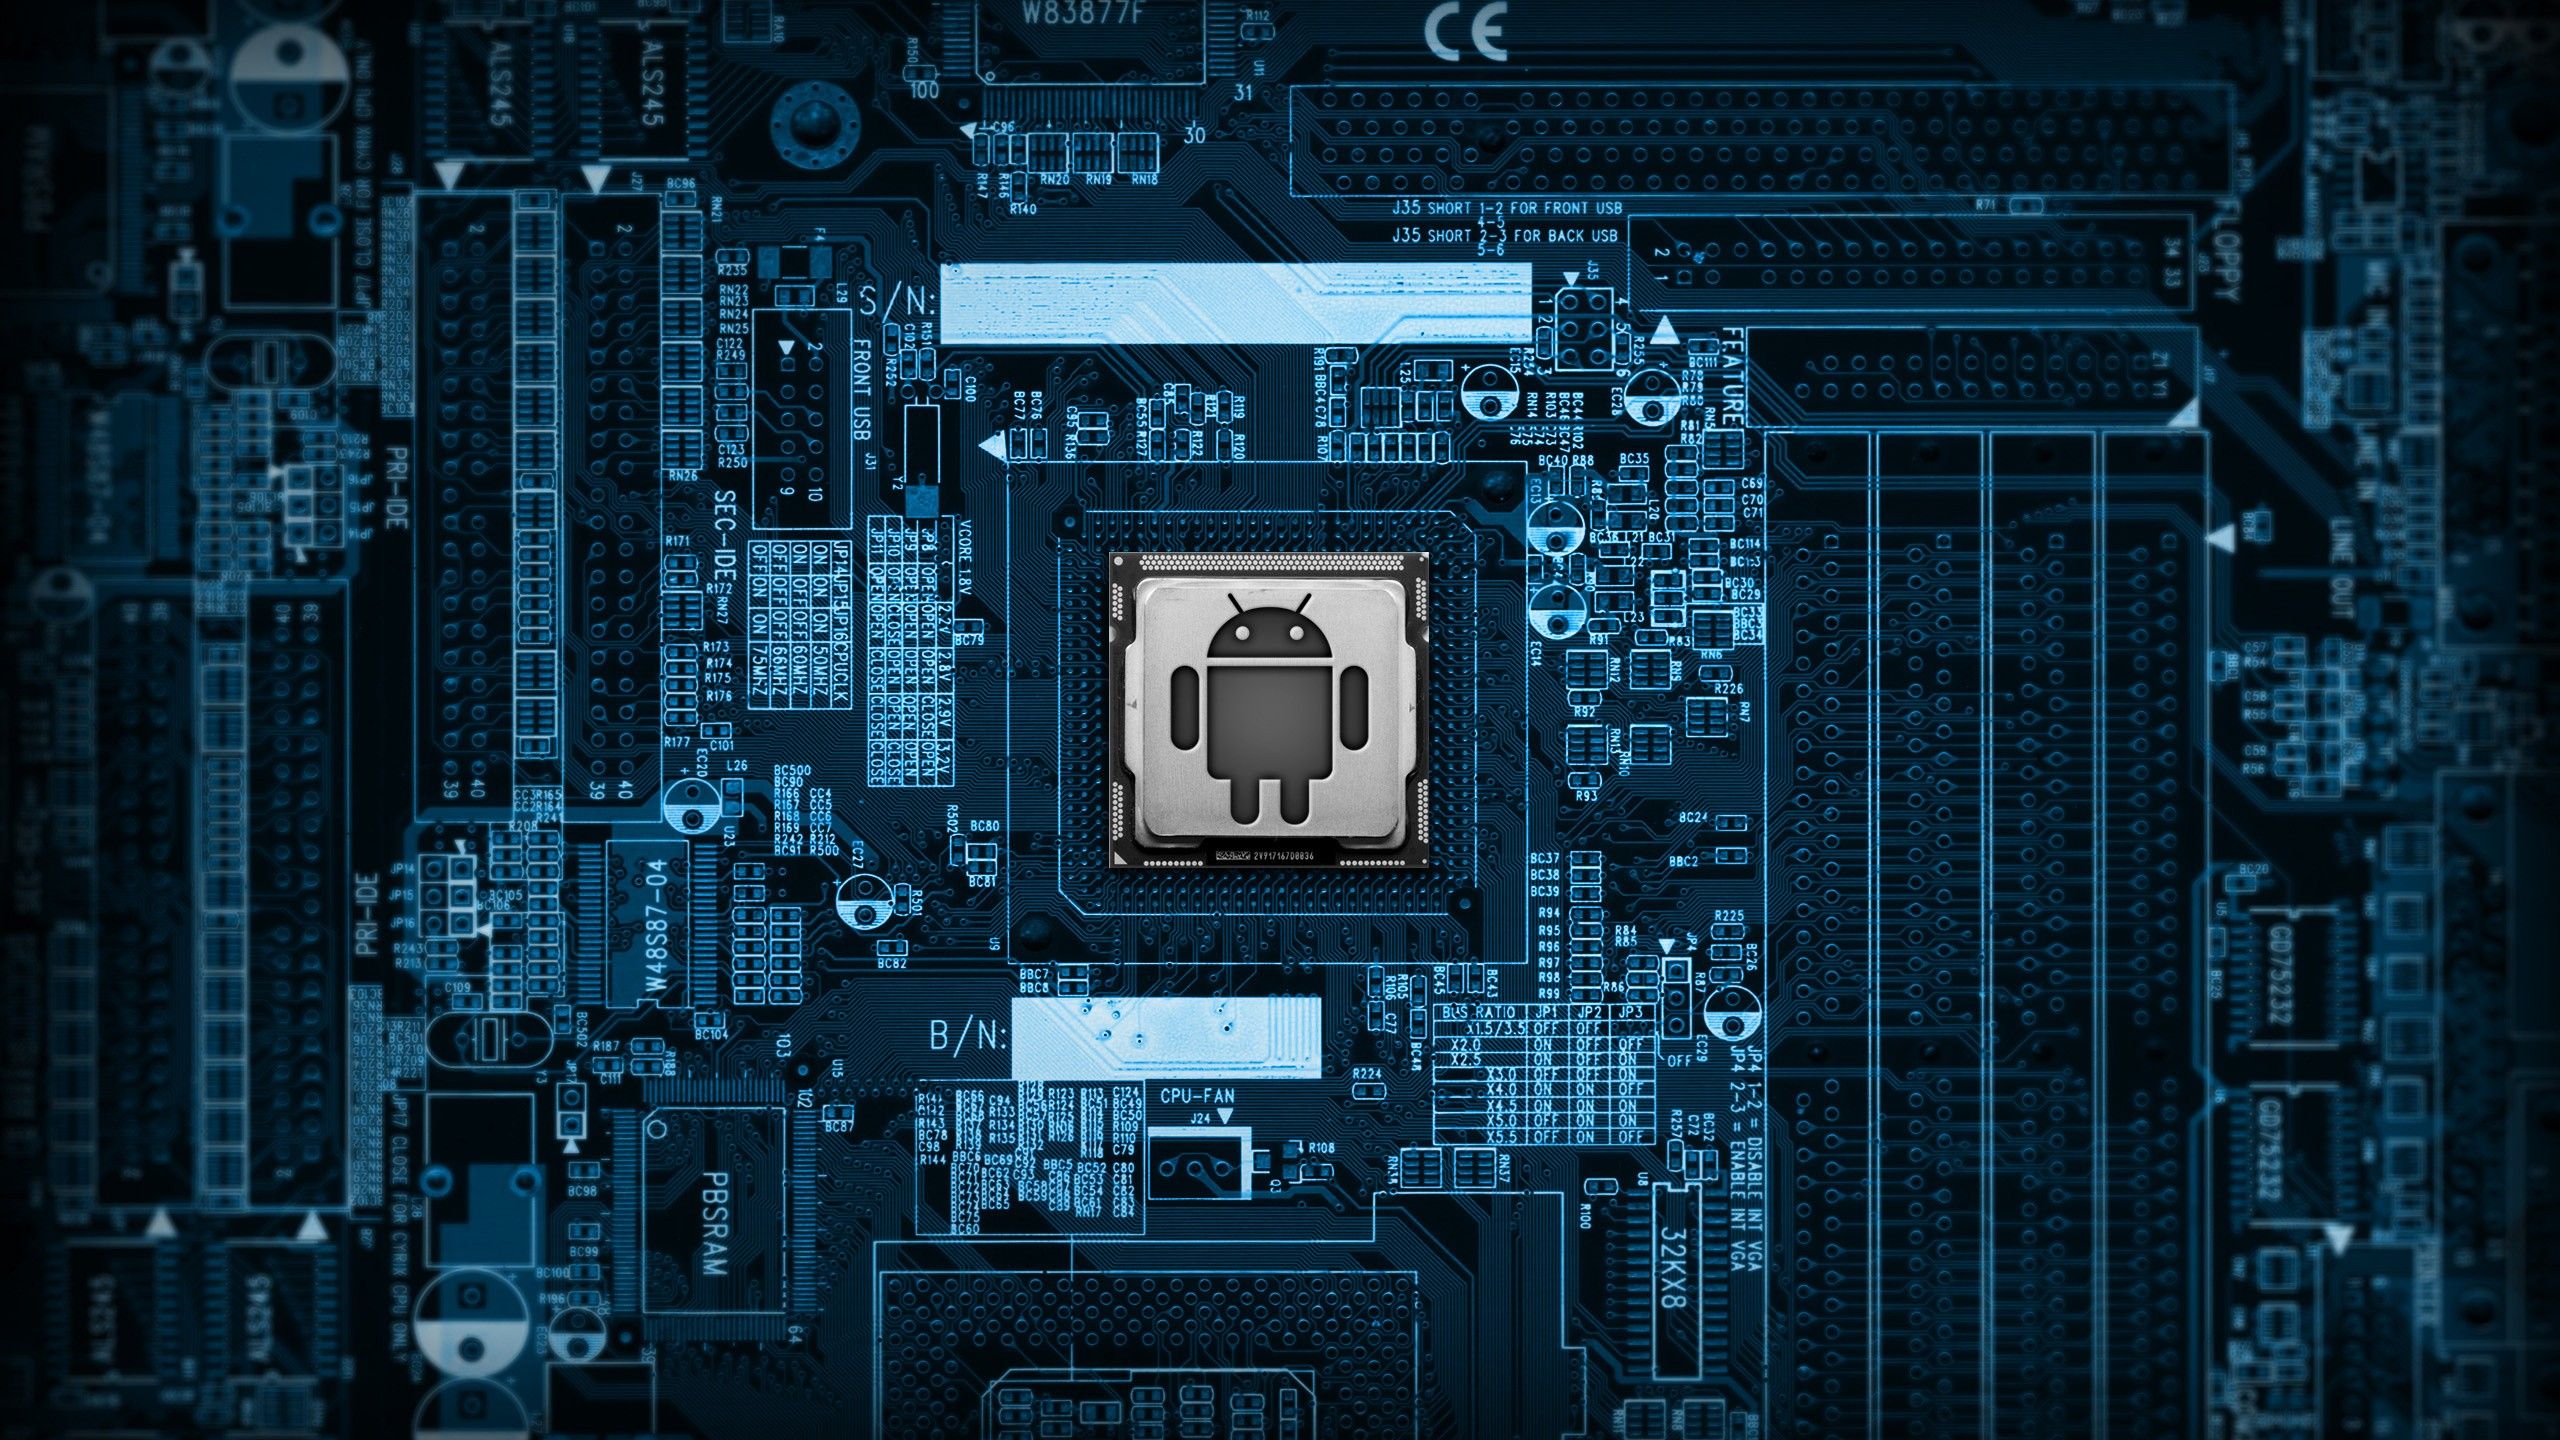 Android (operating system) Wallpaper HD / Desktop and Mobile Background